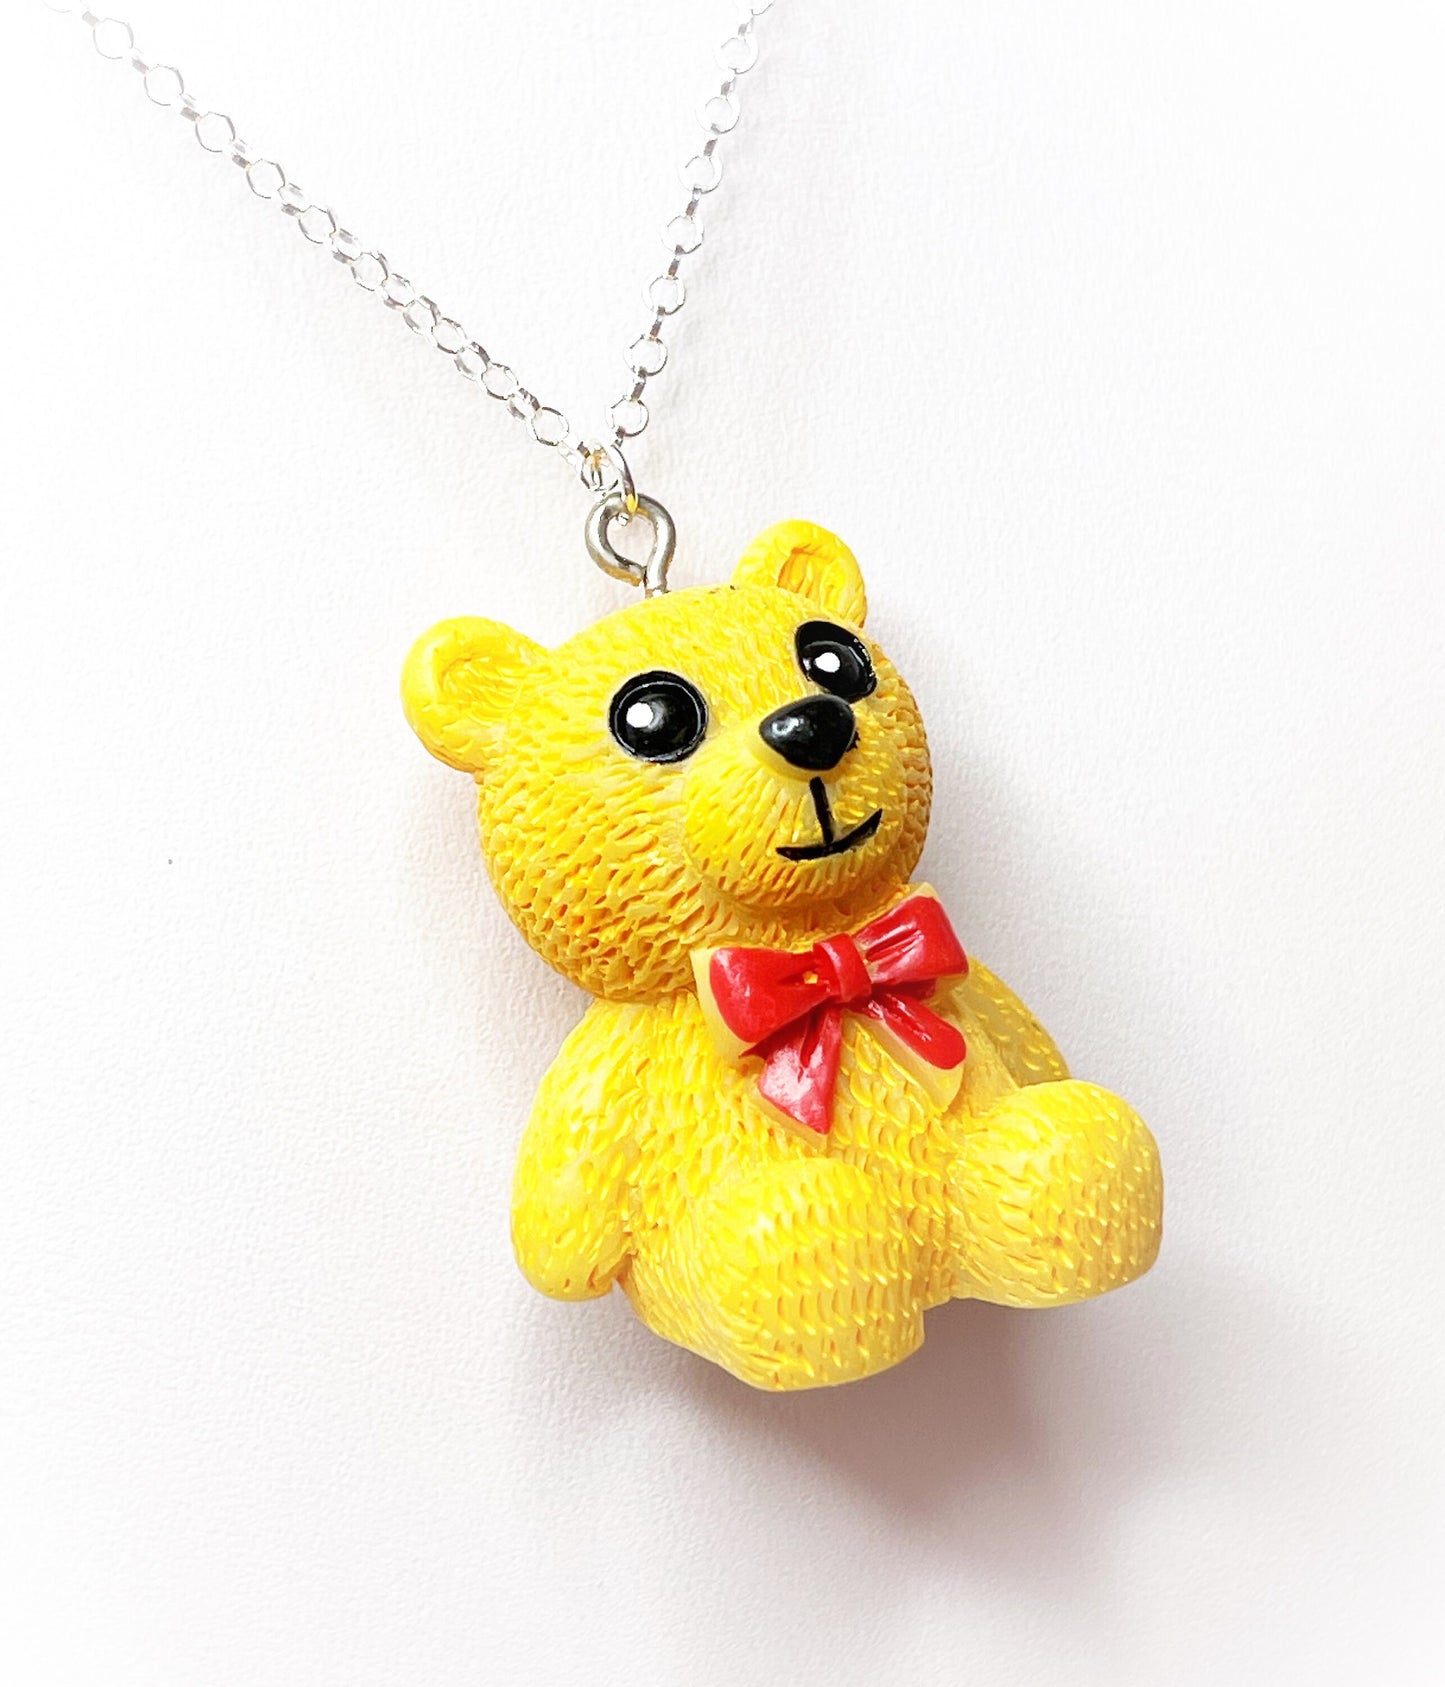 Cute Teddy Bear Pendant, Silver Plated, Sterling Silver, Quirky Jewelry, Necklaces for Women, Fun Jewellery, Novelty Pendant, Bear Necklace